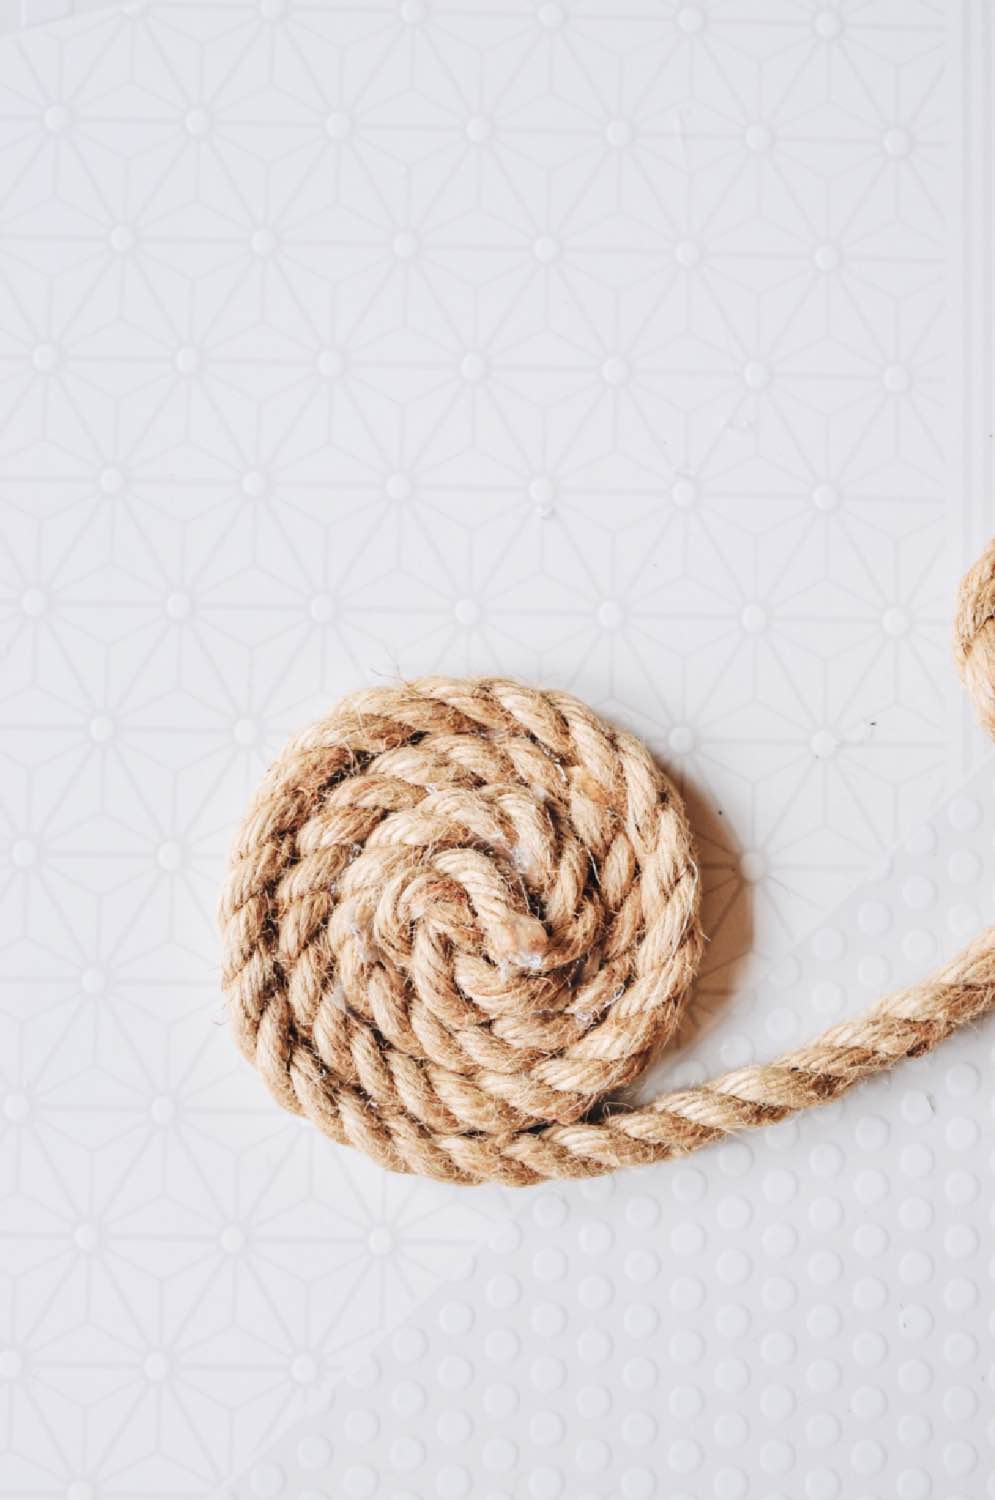 continue to wind the rope diy rope trivet craft tutorial